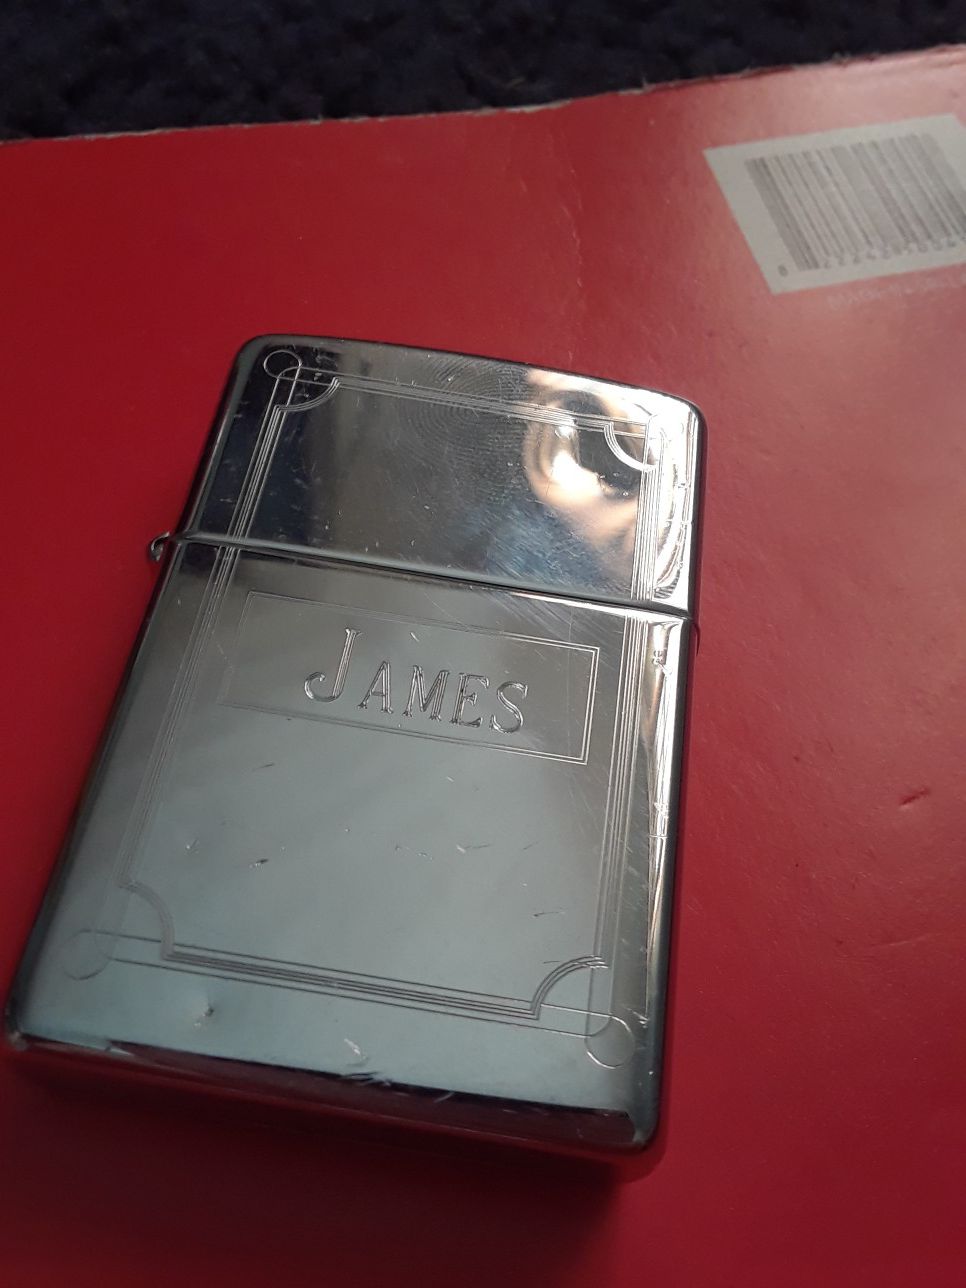 Zippo with the name James on it